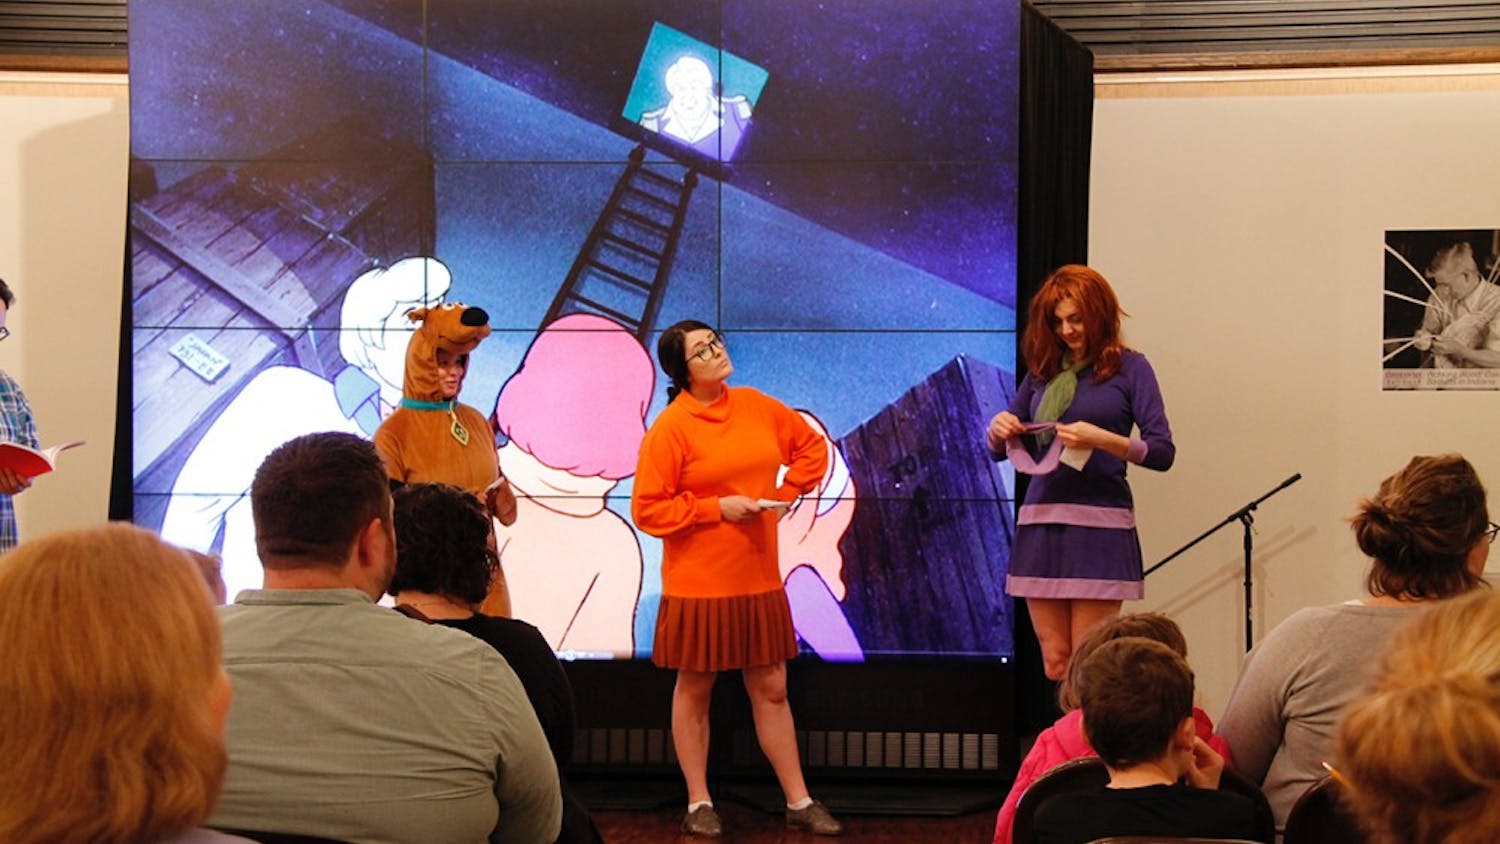 Scooby-Doo, Velma and Daphne, played by student cosplayers Kristen Pimley, Erin Garman and Alexa Lively, led efforts to solve the mystery of the missing butter churn during the "Mystery at the Museum" event Sunday afternoon at Mathers.&nbsp;